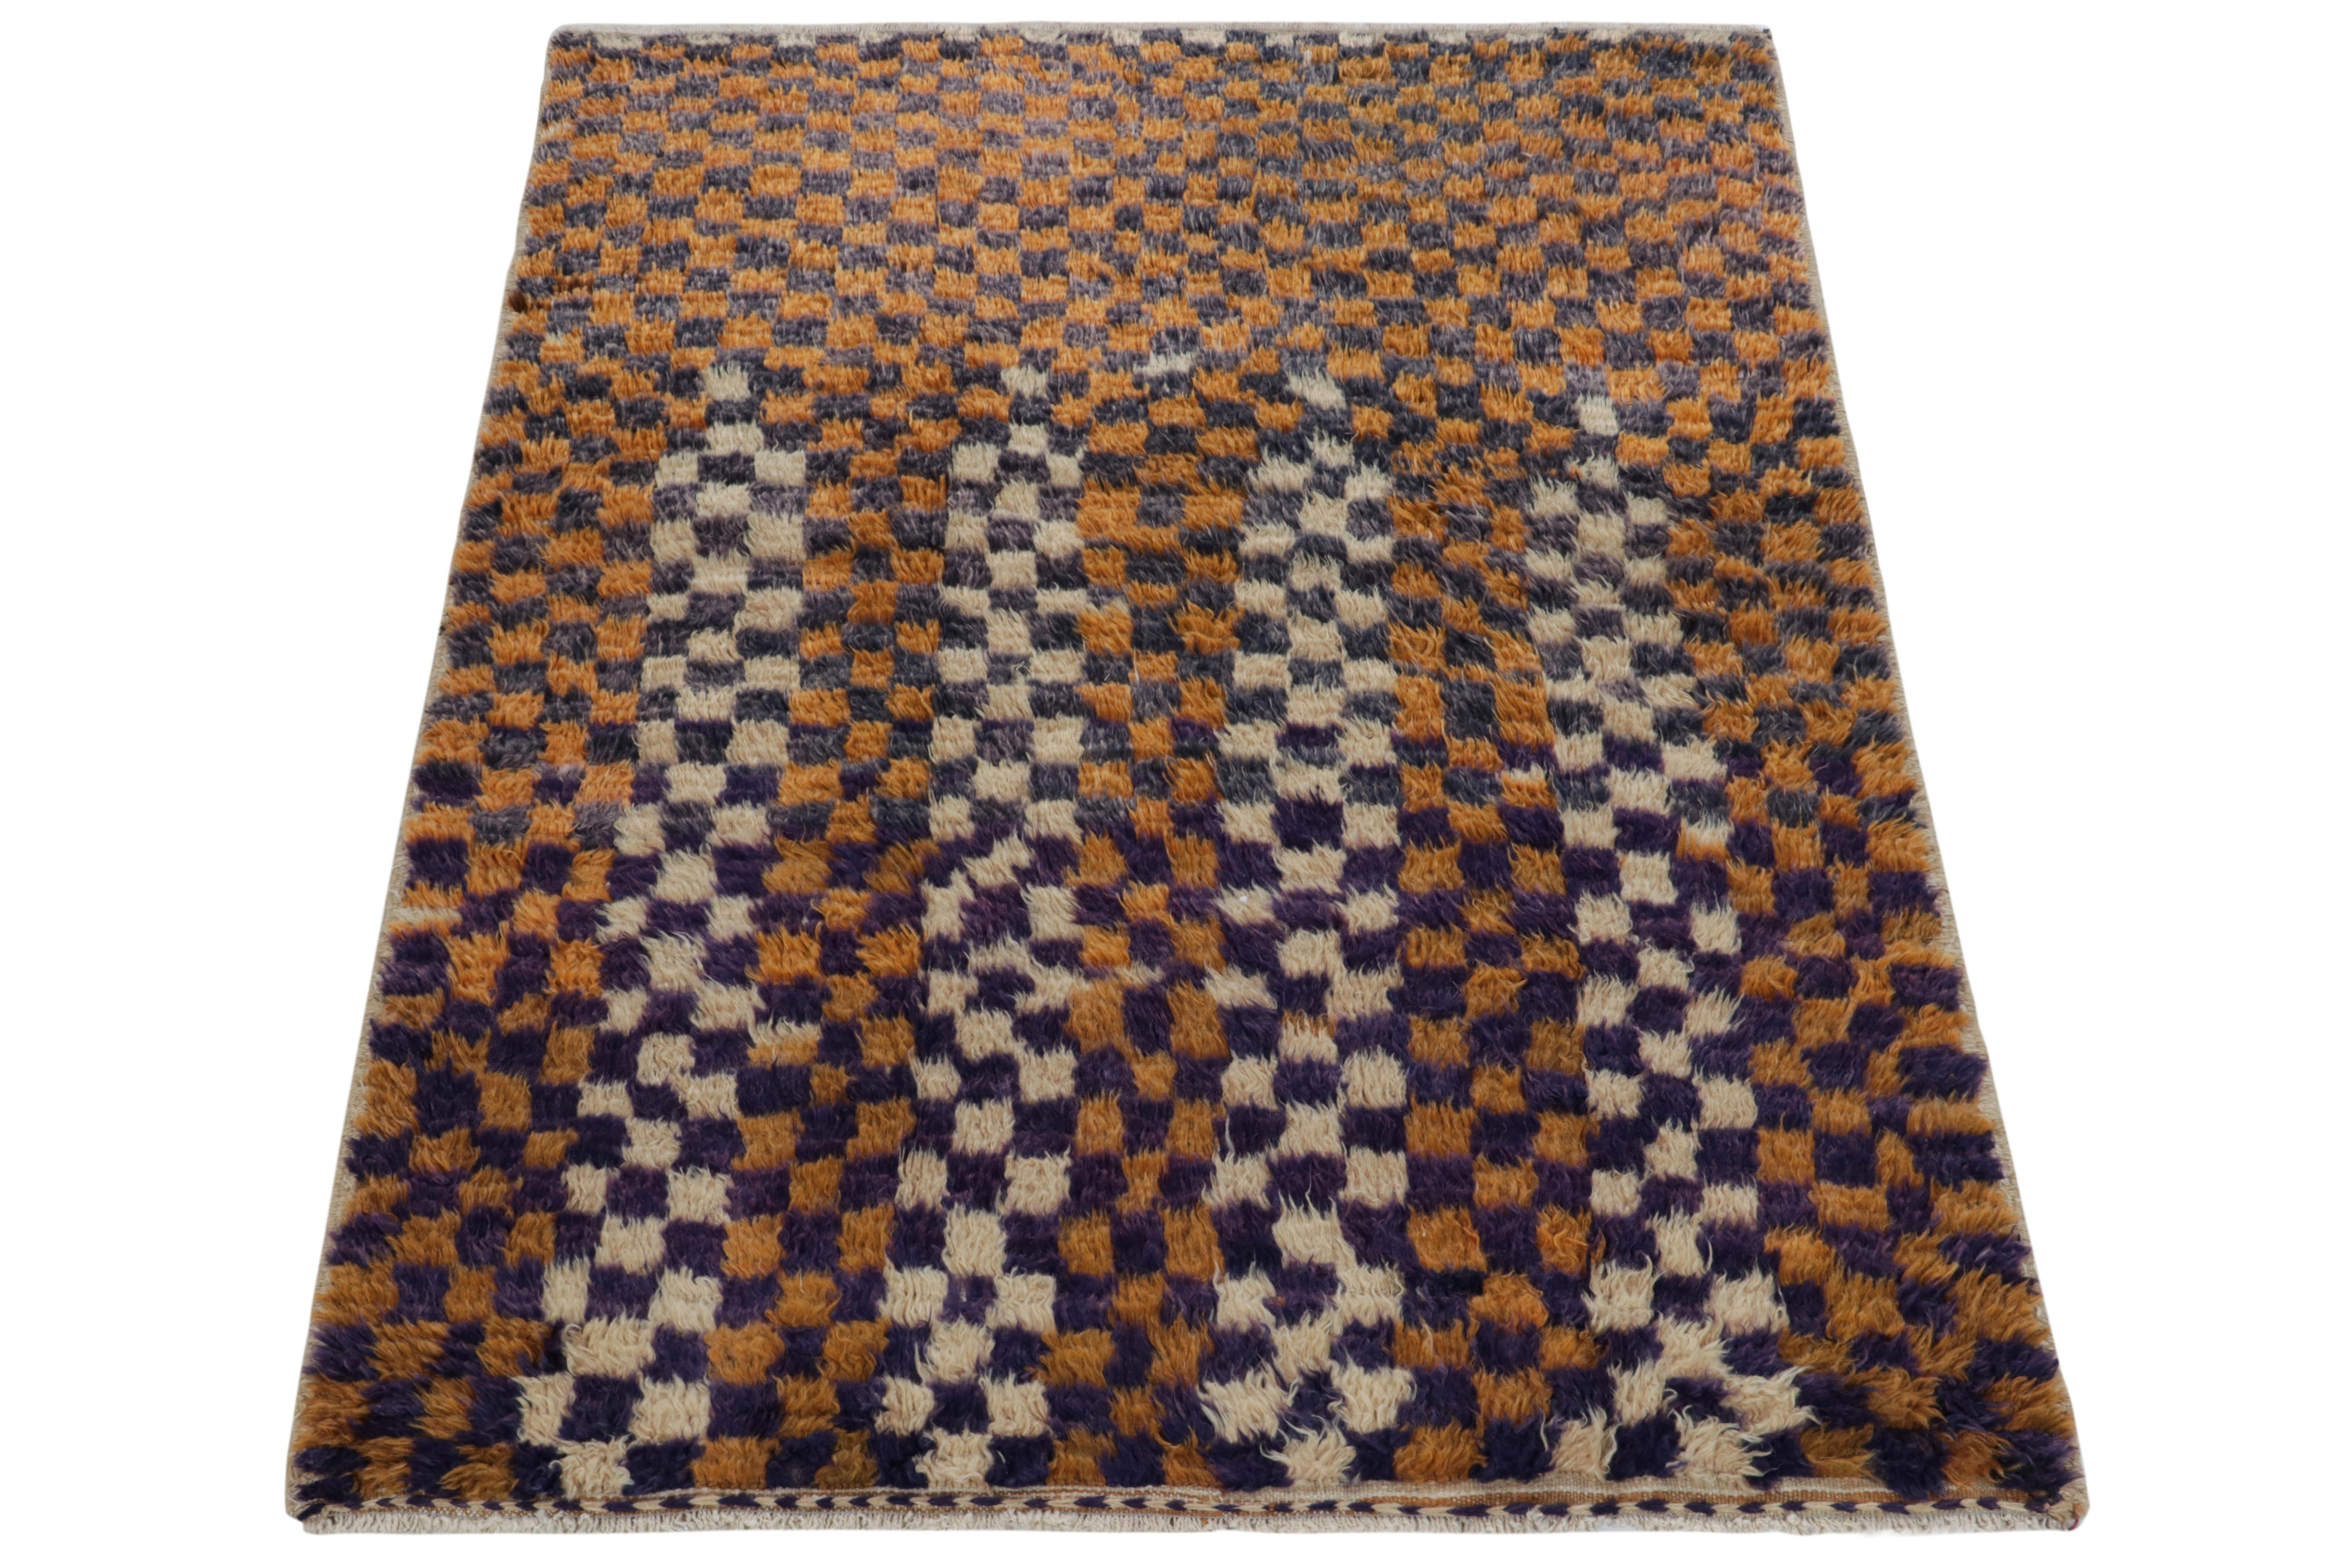 Hand-knotted in wool, a 5x7 vintage Tulu rug originating from Turkey circa 1950-1960, now joining Rug & Kilim’s classic tribal collection. The healthy high pile features a well defined checkered pattern in ink and midnight blue, with marigold tones